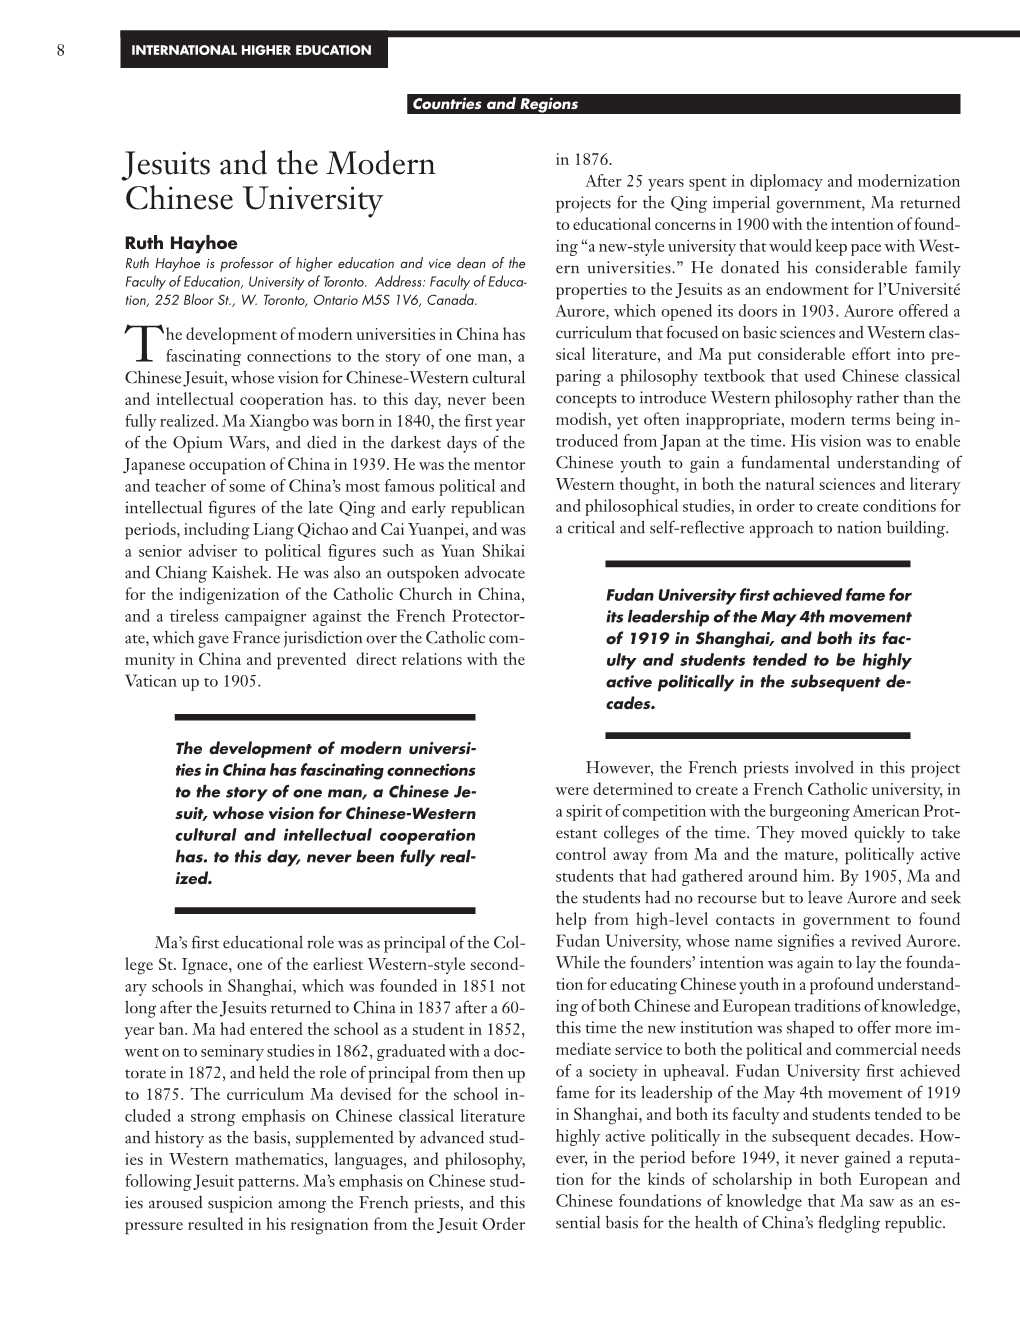 Jesuits and the Modern Chinese University